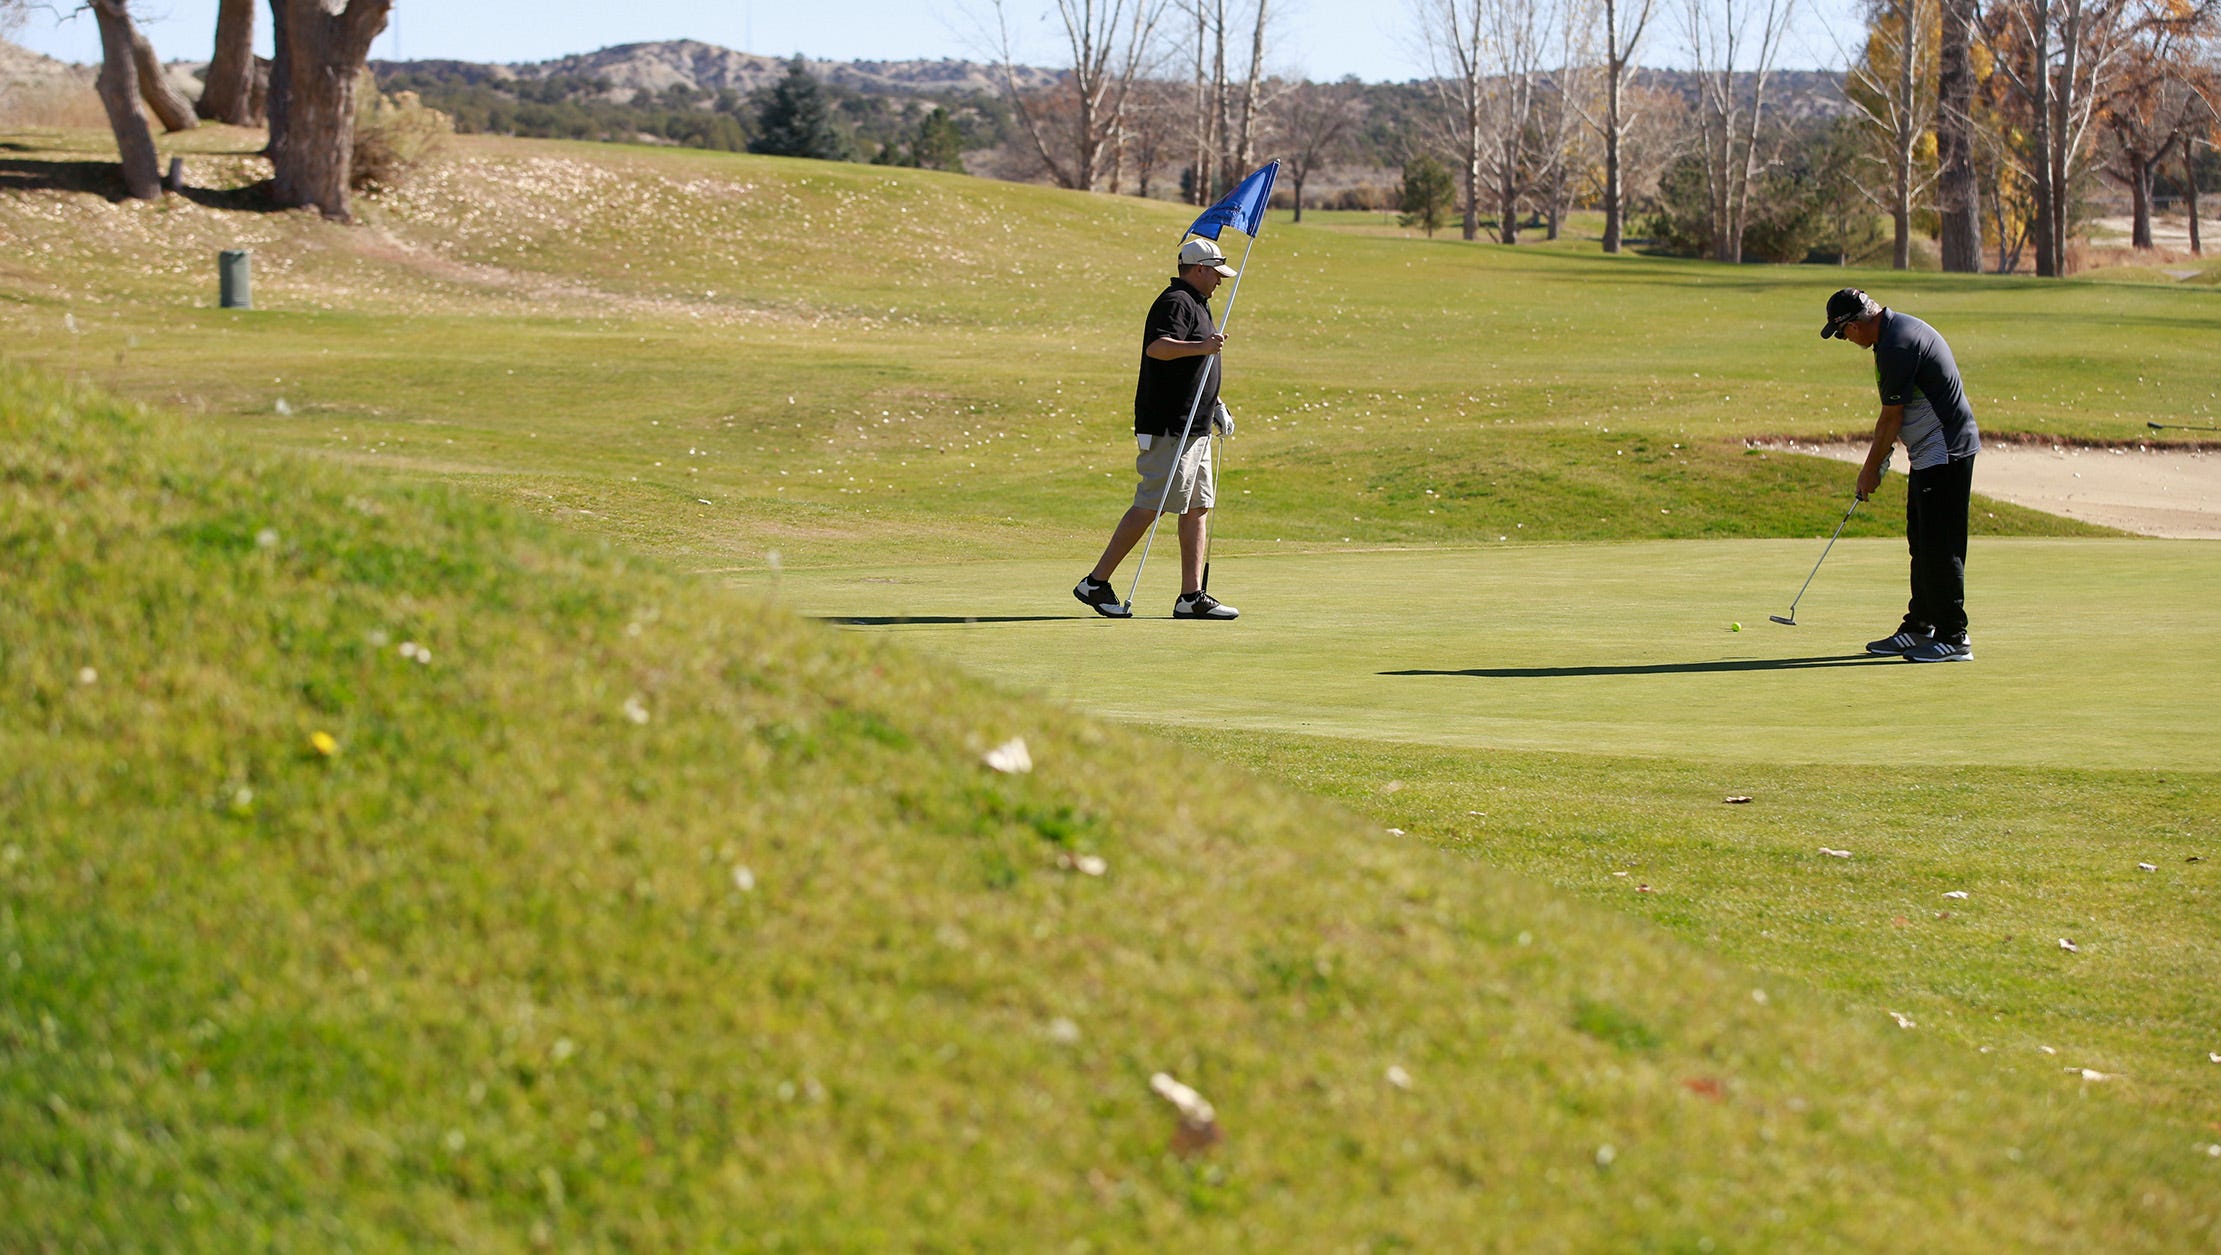 A pair plays golf on Nov. 11 at the Aztec Municipal Golf Course.